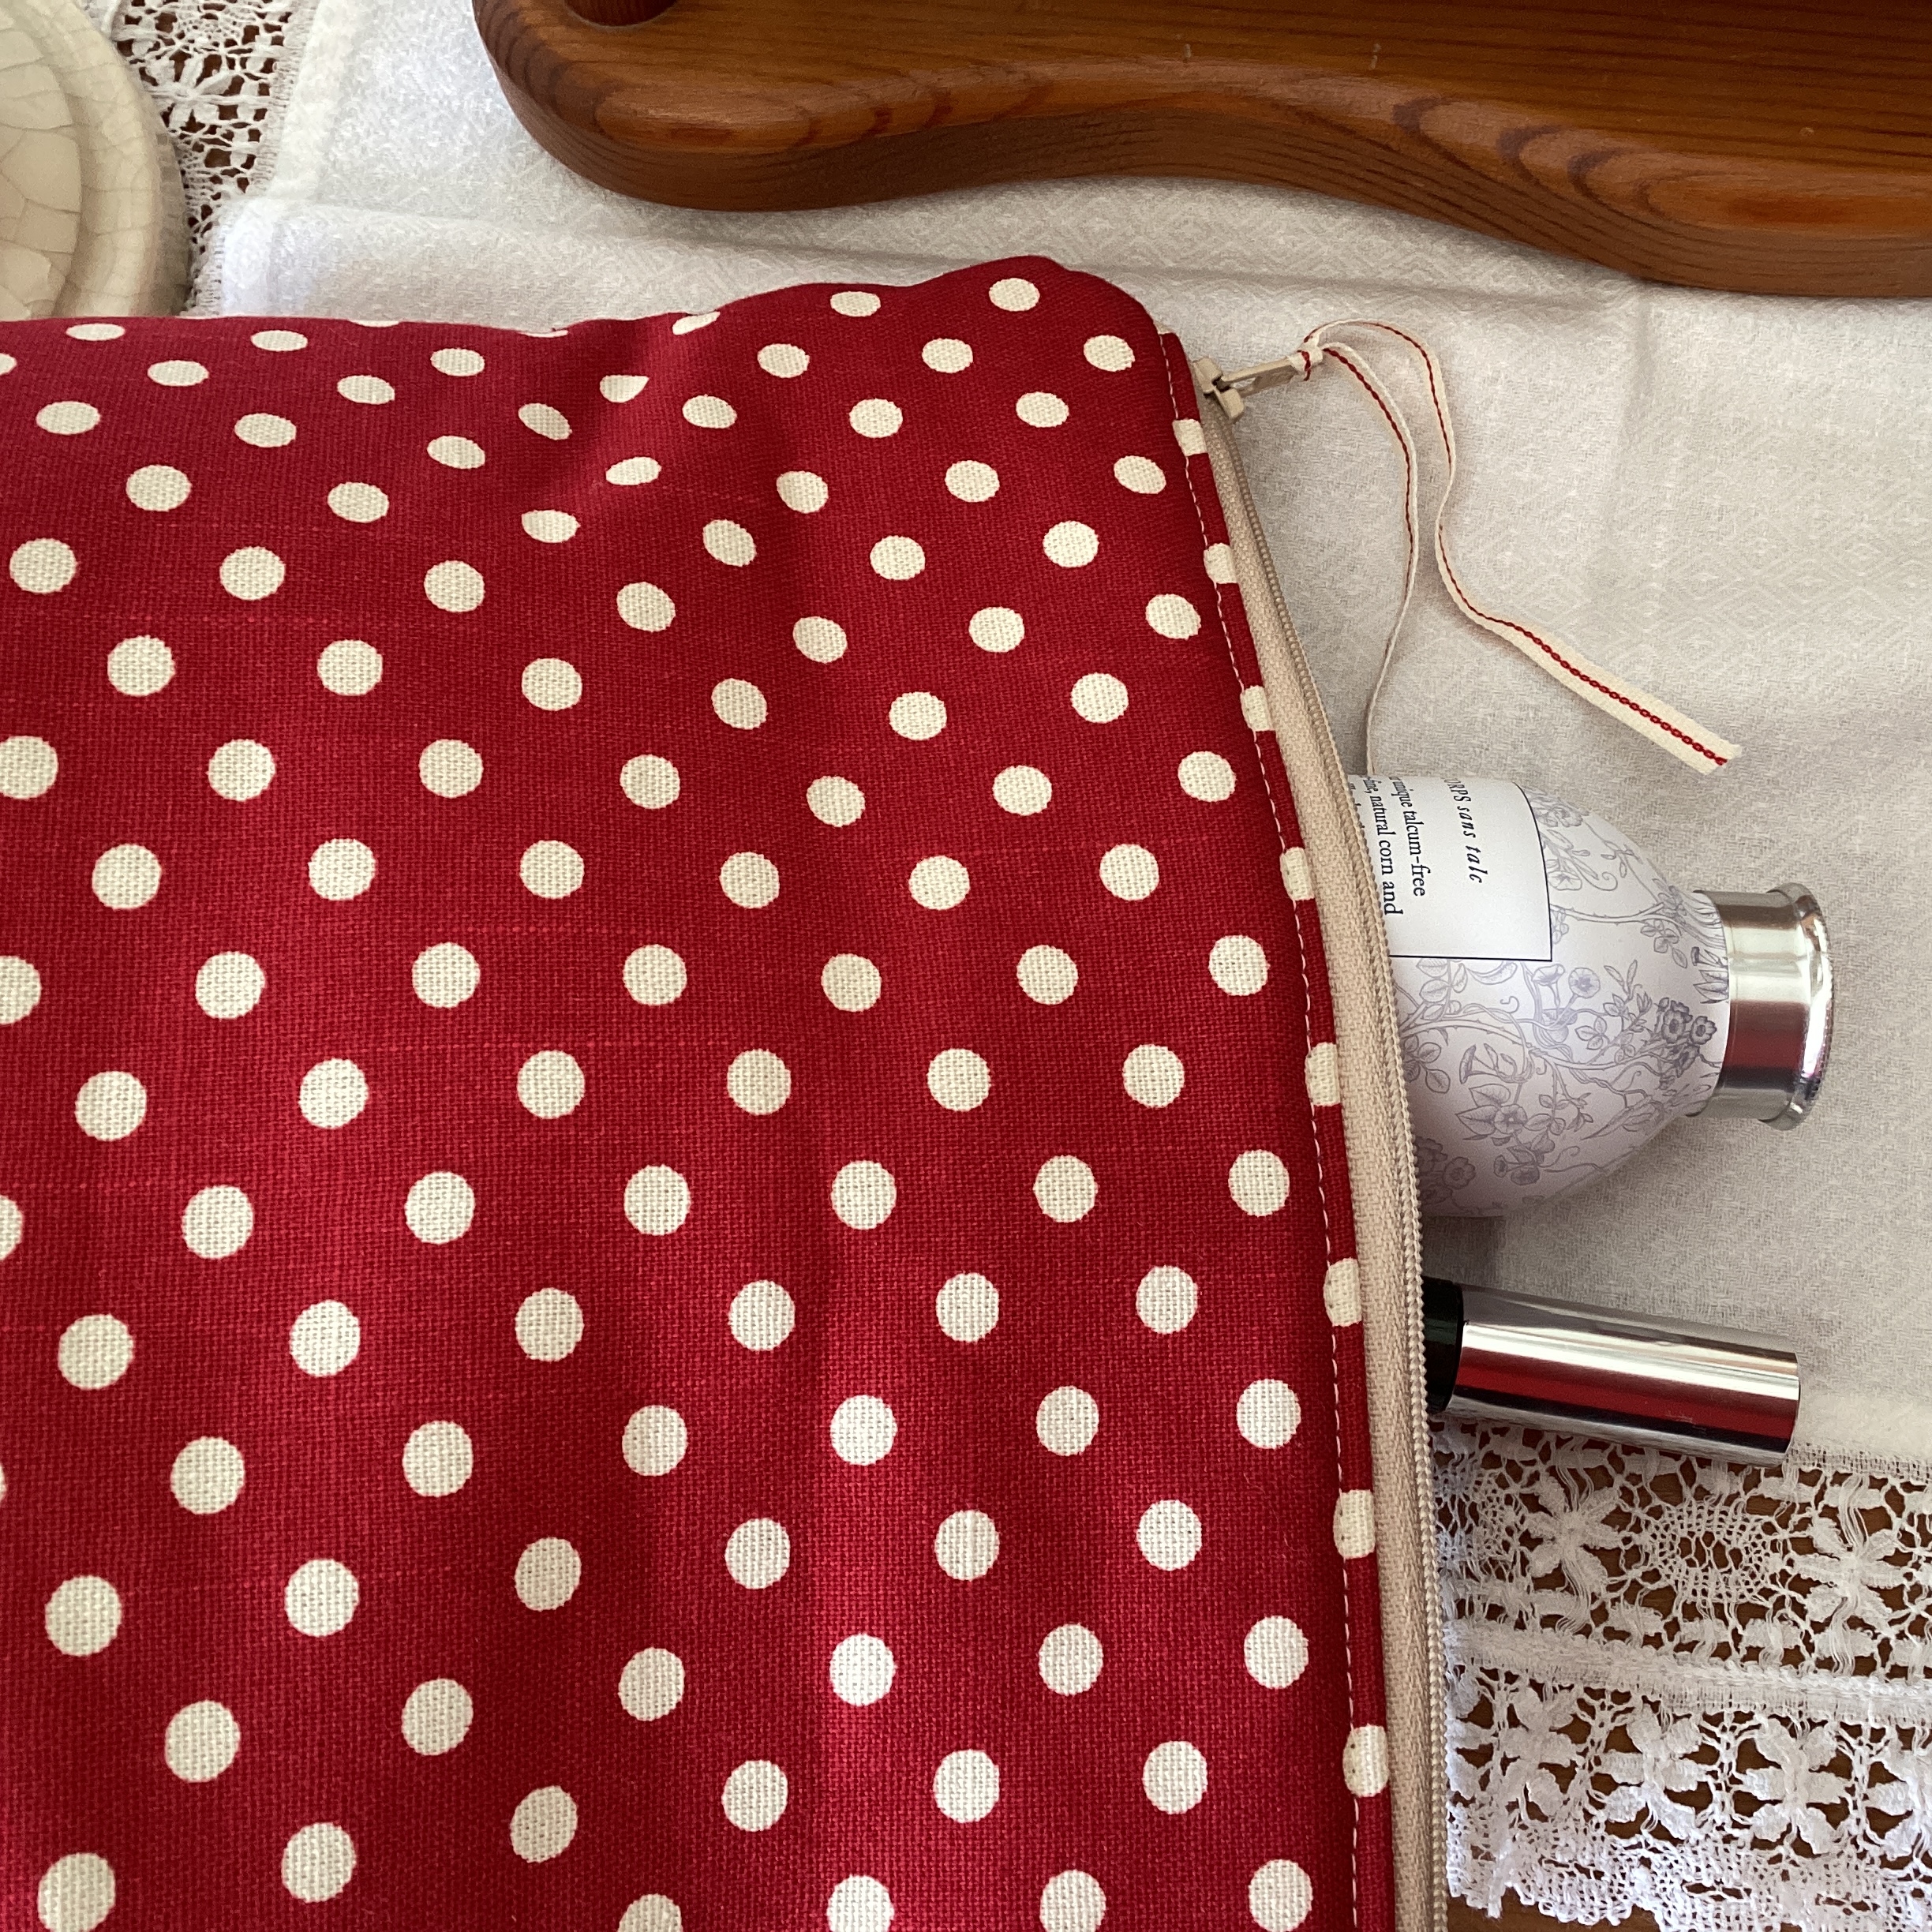 Zipped Pouch - red and white spot